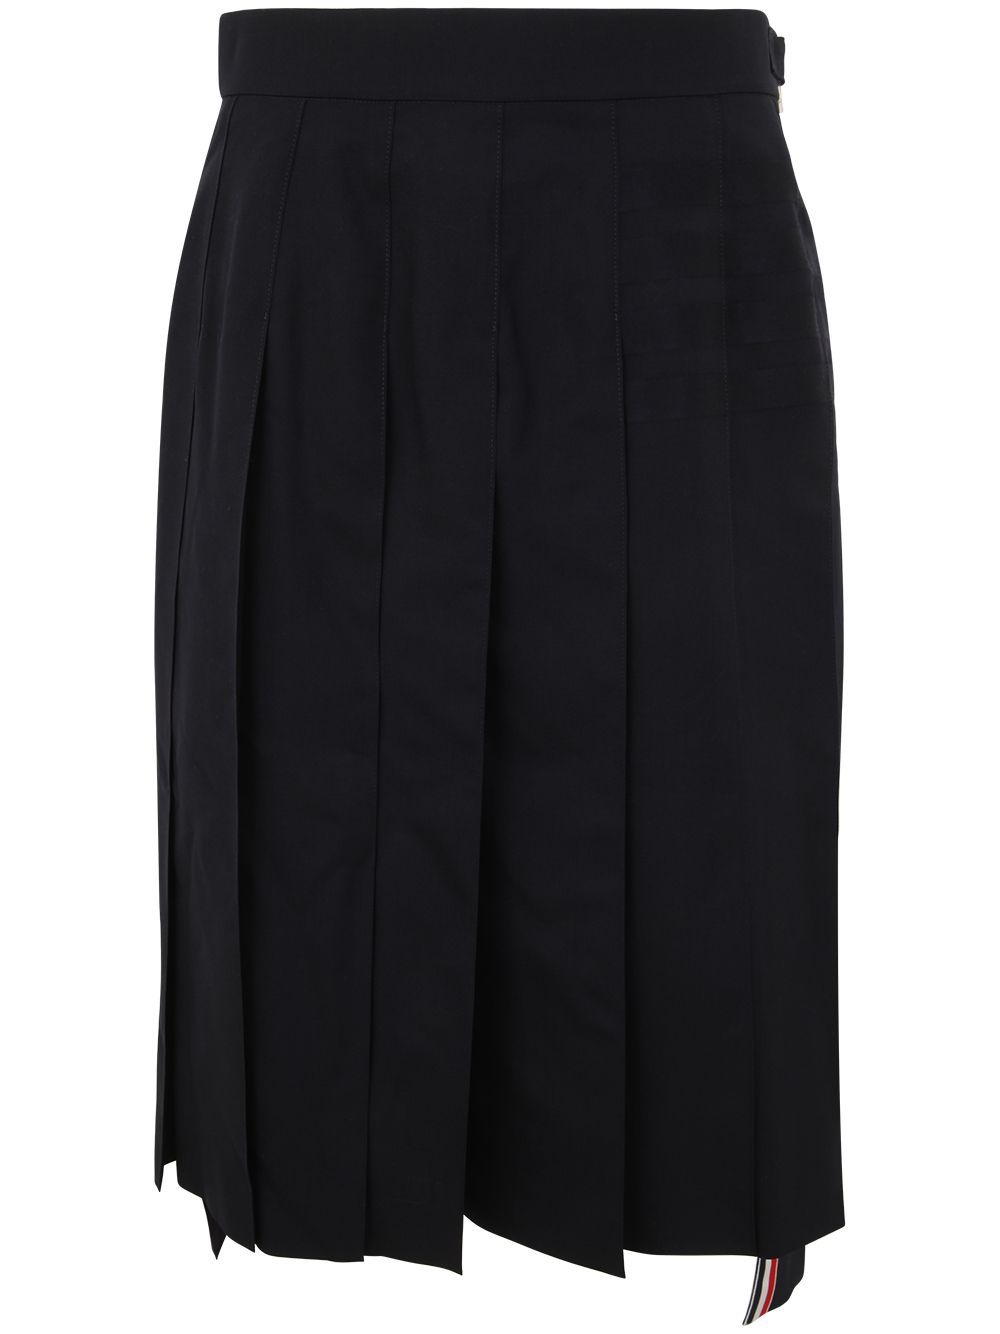 THOM BROWNE BELOW KNEE DROPPED BACK PLEATED SKIRT IN ENGINEERED 4 BAR PLAIN WEAVE SUITING,FGC400V.06146